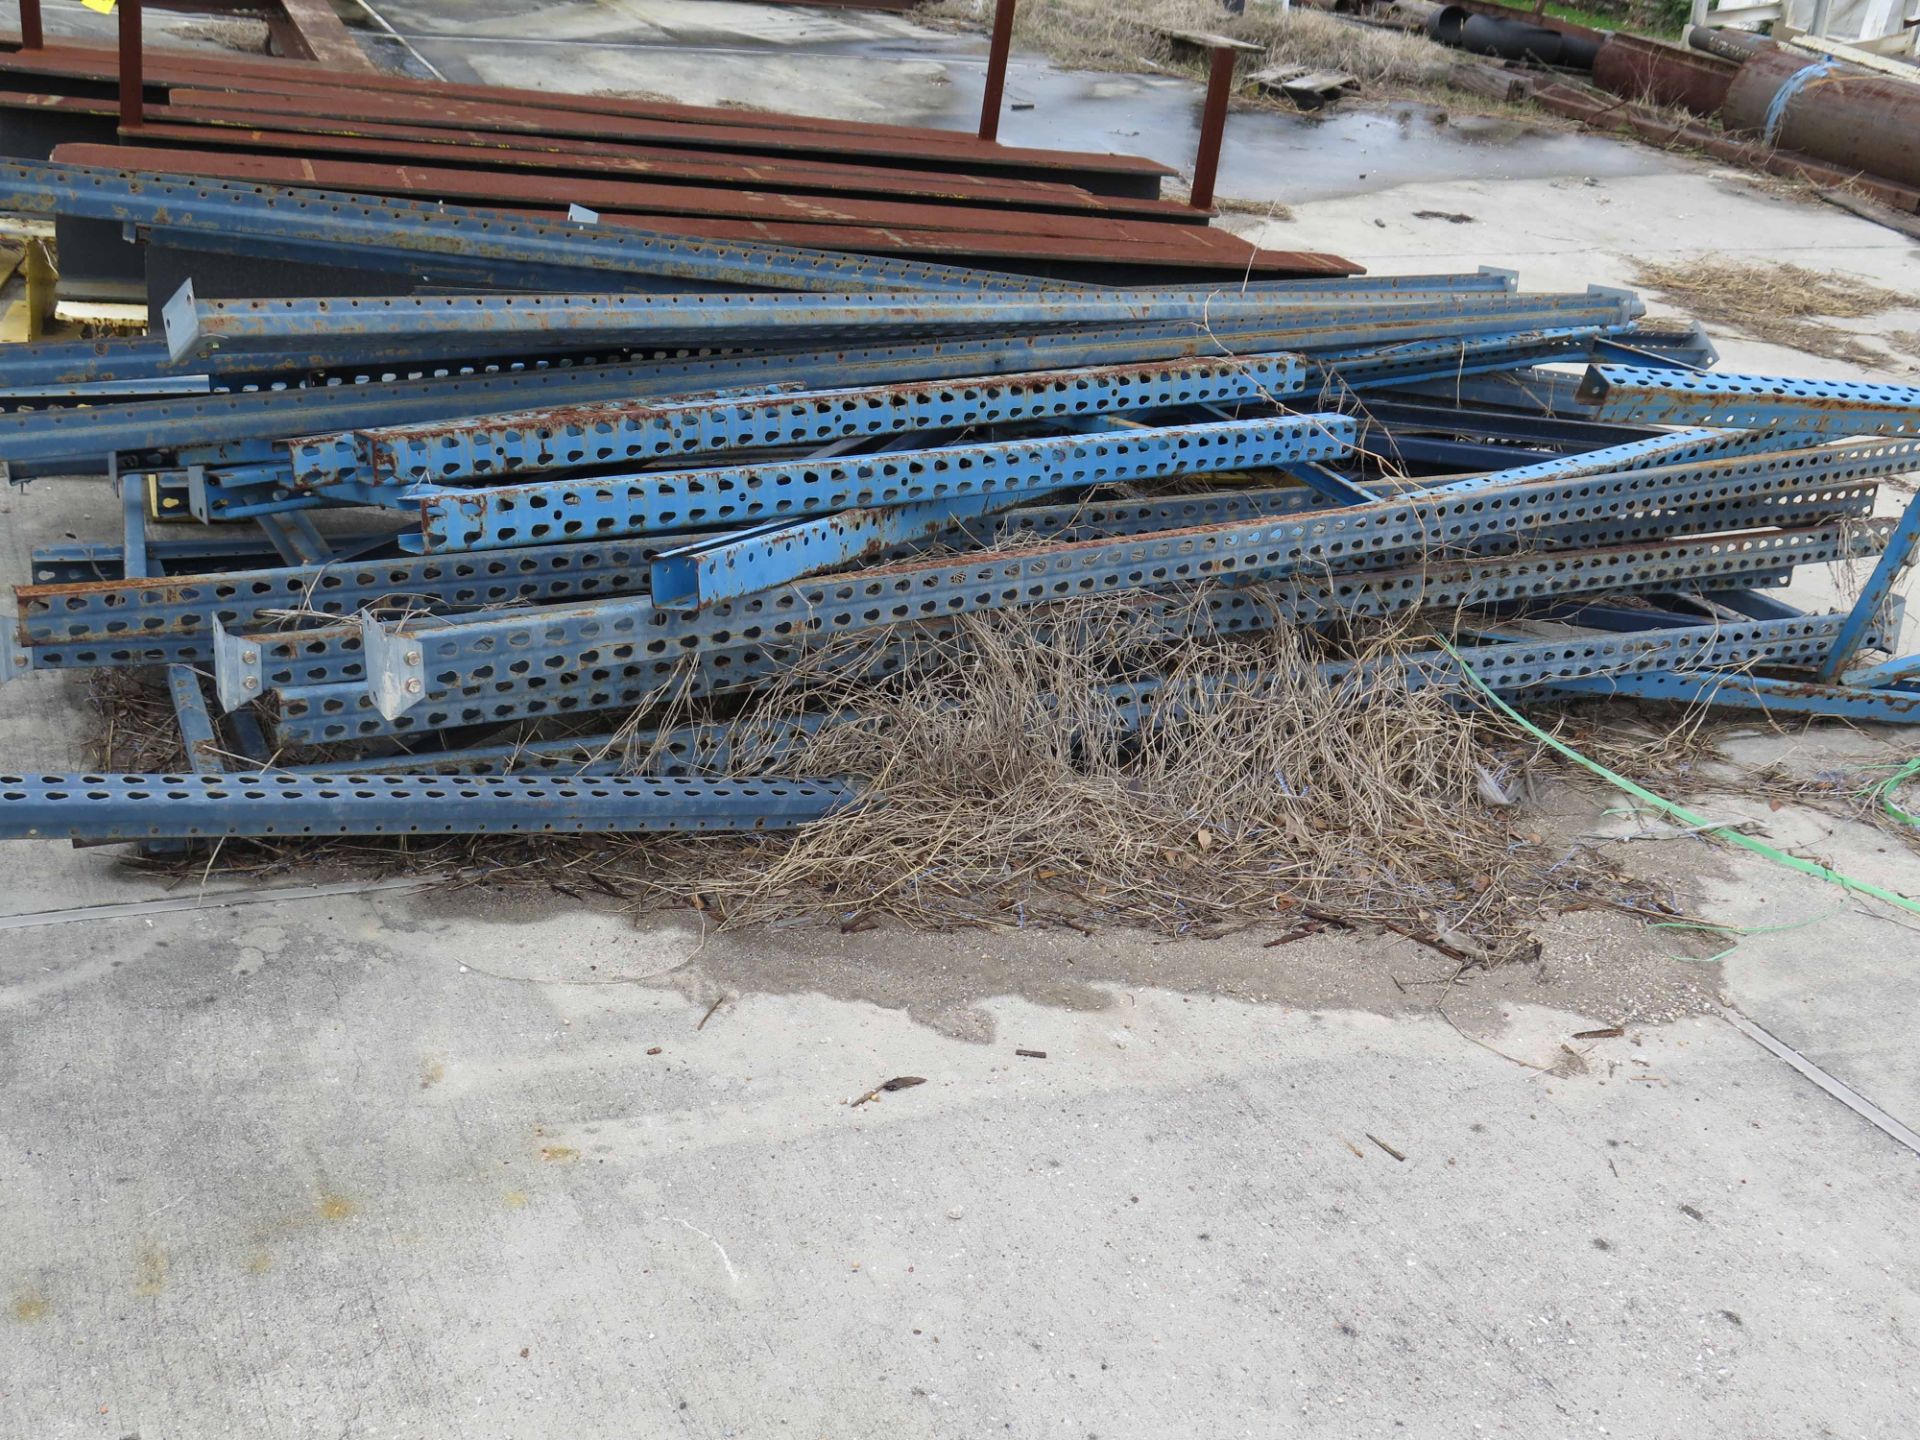 LOT CONSISTING OF: pallet rack uprights & cross arms (add'l. cross arms are located on top of Lot